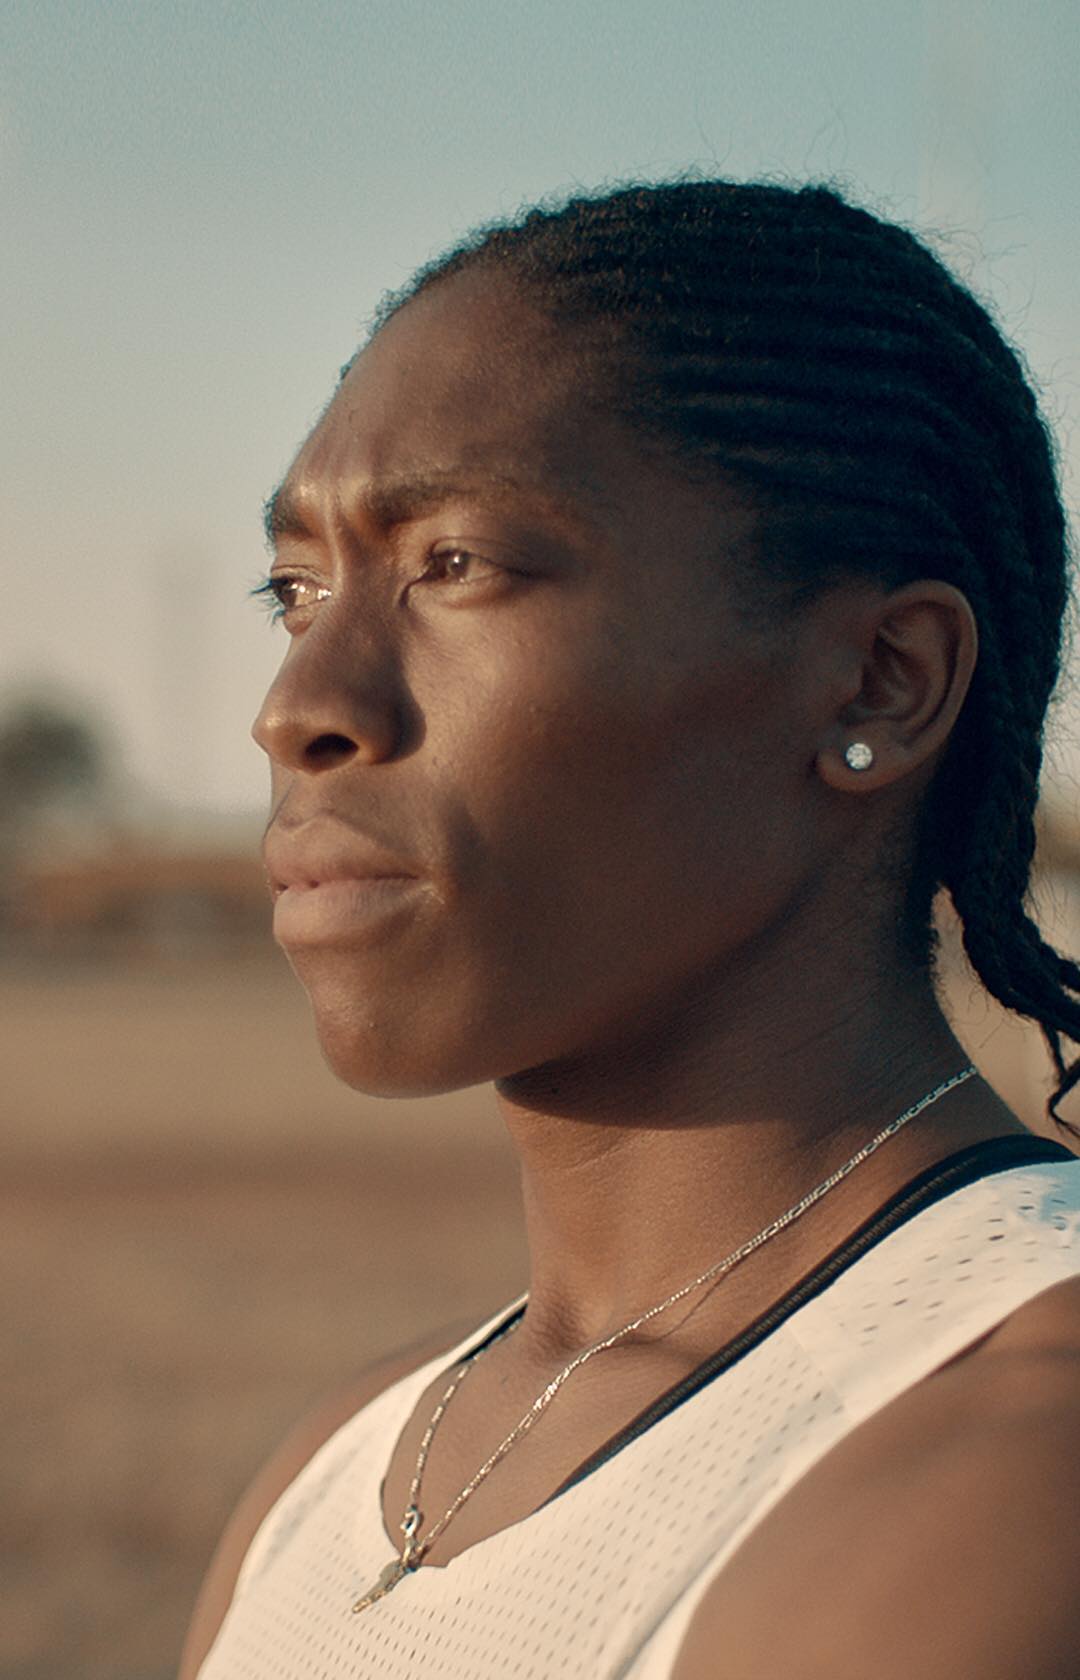 Nike - “All dreams come from here, they come from the dust.” - @castersemenya800m ⁣
⁣
Caster’s dream started on the dusty roads of rural Limpopo, on the track in Polokwane and on the podiums of the wo...